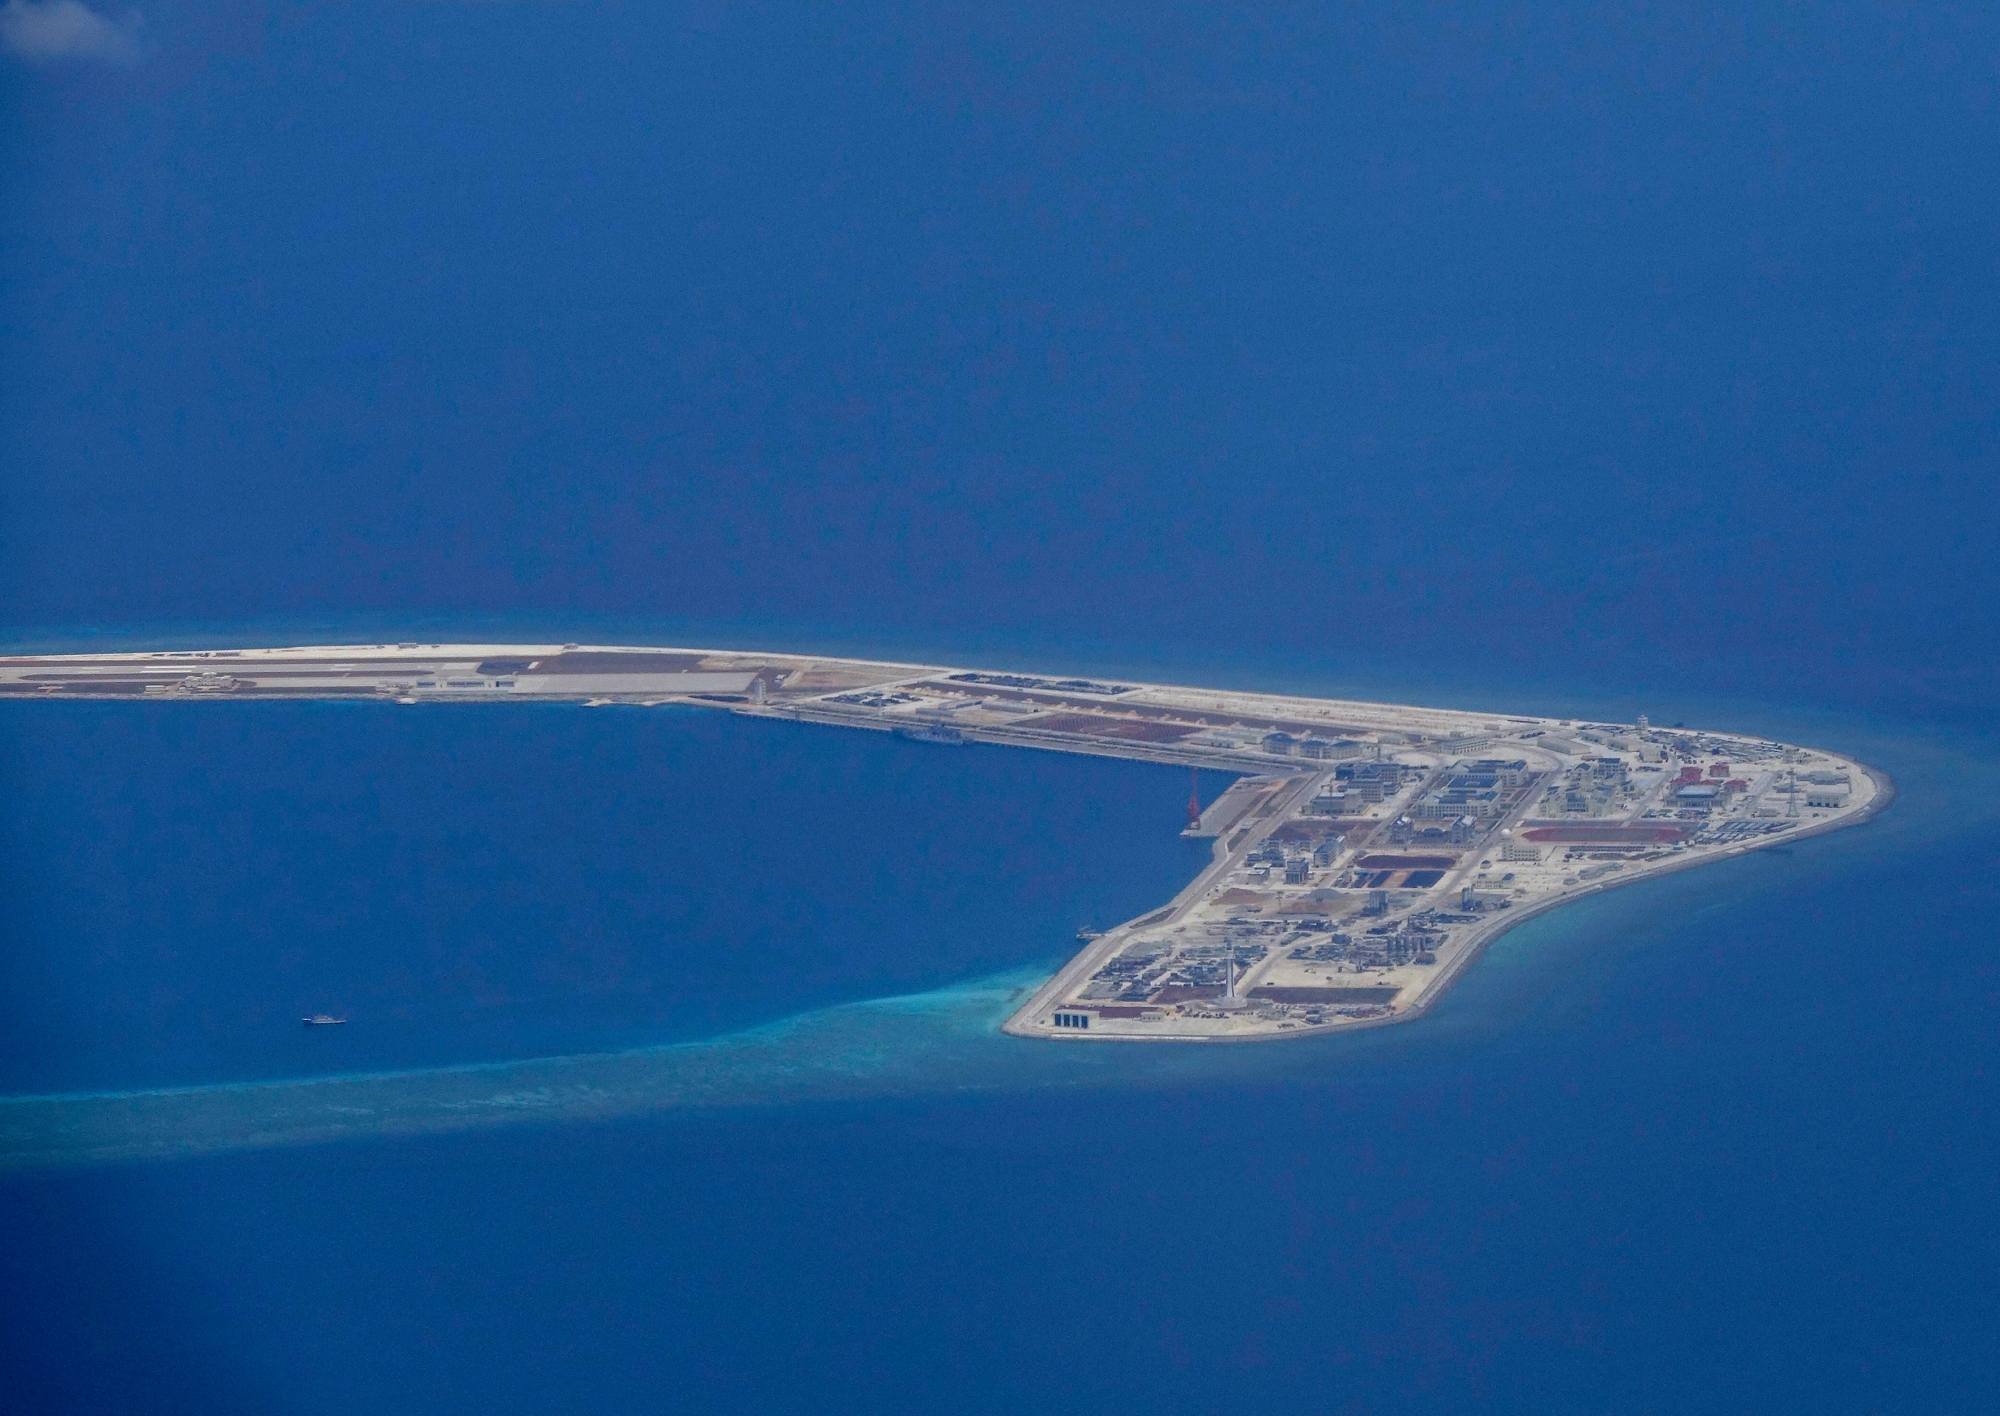 epa05918658 An aerial view of the Subi reef, one of the tiny islands being claimed by China in the disputed South China Sea, photographed through an aircraft's window on 21 April 2017. According to news reports, President Rodrigo Duterte has ordered the Armed Forces of the Philippines (AFP) to occupy all islands of the Philippines in the South China Sea to strengthen the country's claims. Aside from Philippines and China, other countries have overlapping claims in parts of the South China Sea including Brunei, Malaysia, Vietnam and Taiwan.  EPA/FRANCIS R. MALASIG AT SEA PHILIPPINES SOUTH CHINA SEA DISPUTE